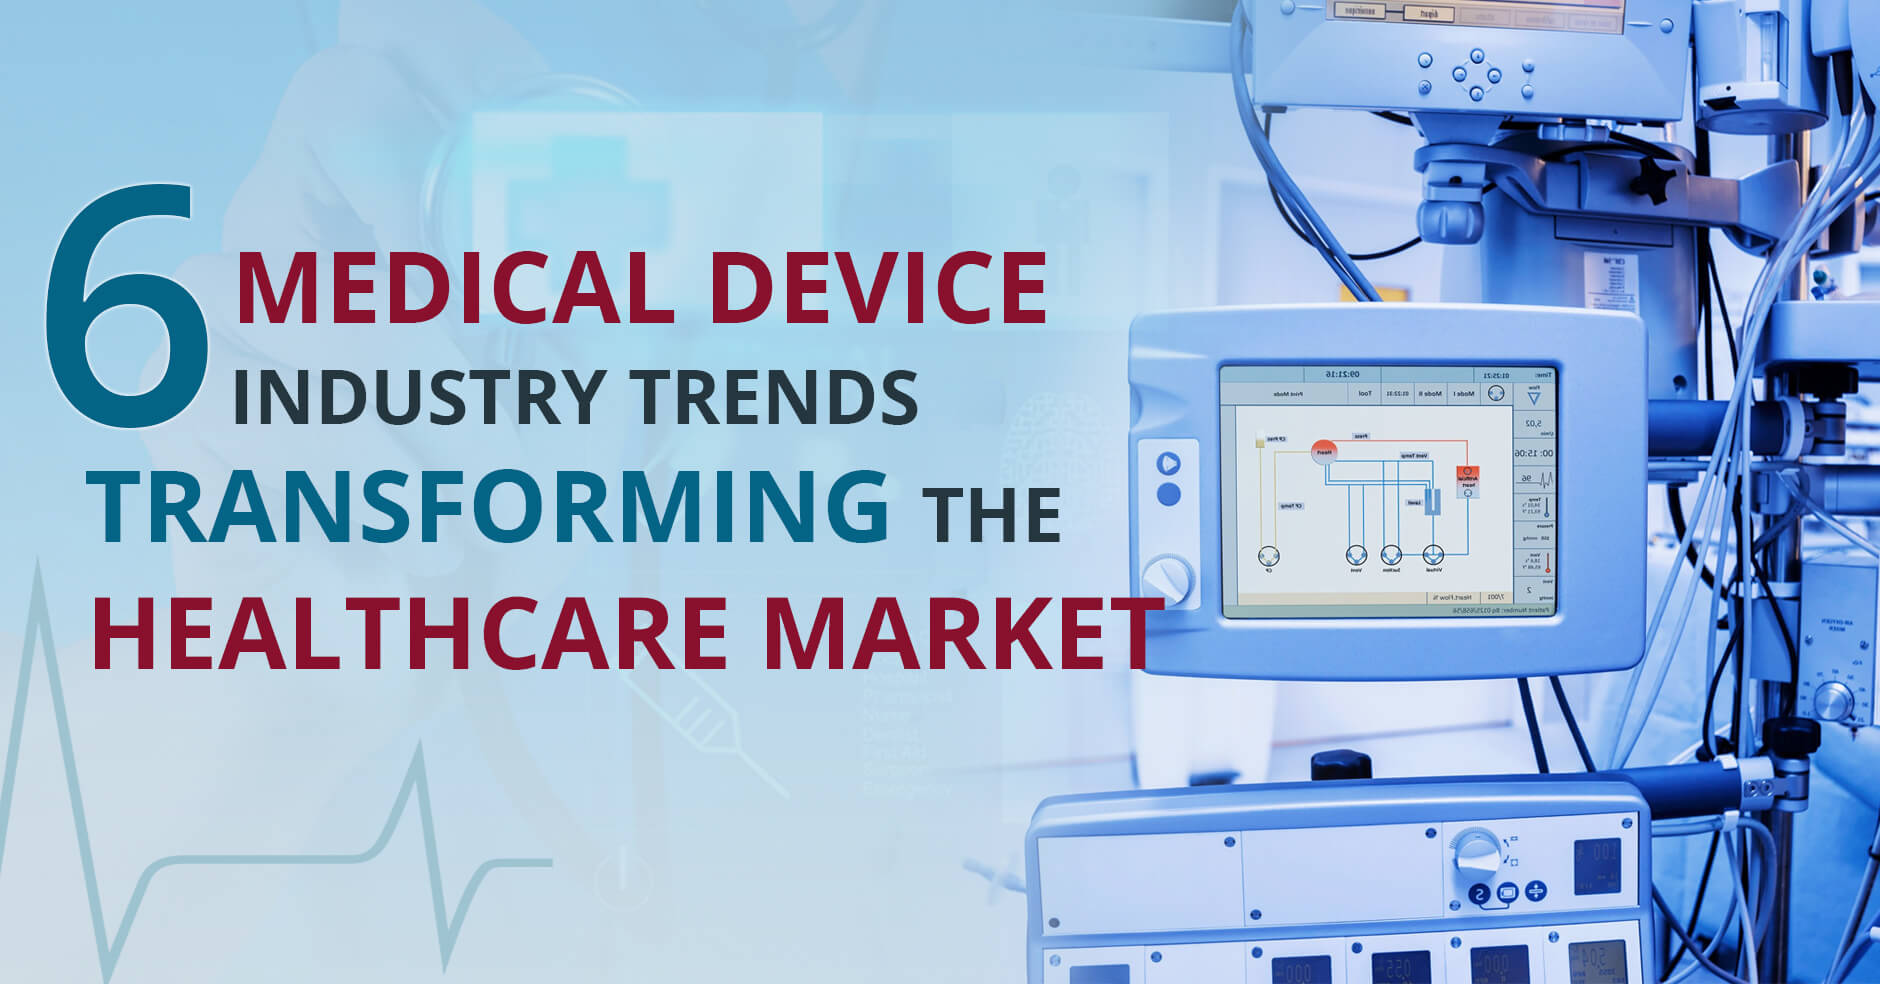 6 Medical Device Industry Trends Transforming the Healthcare Market